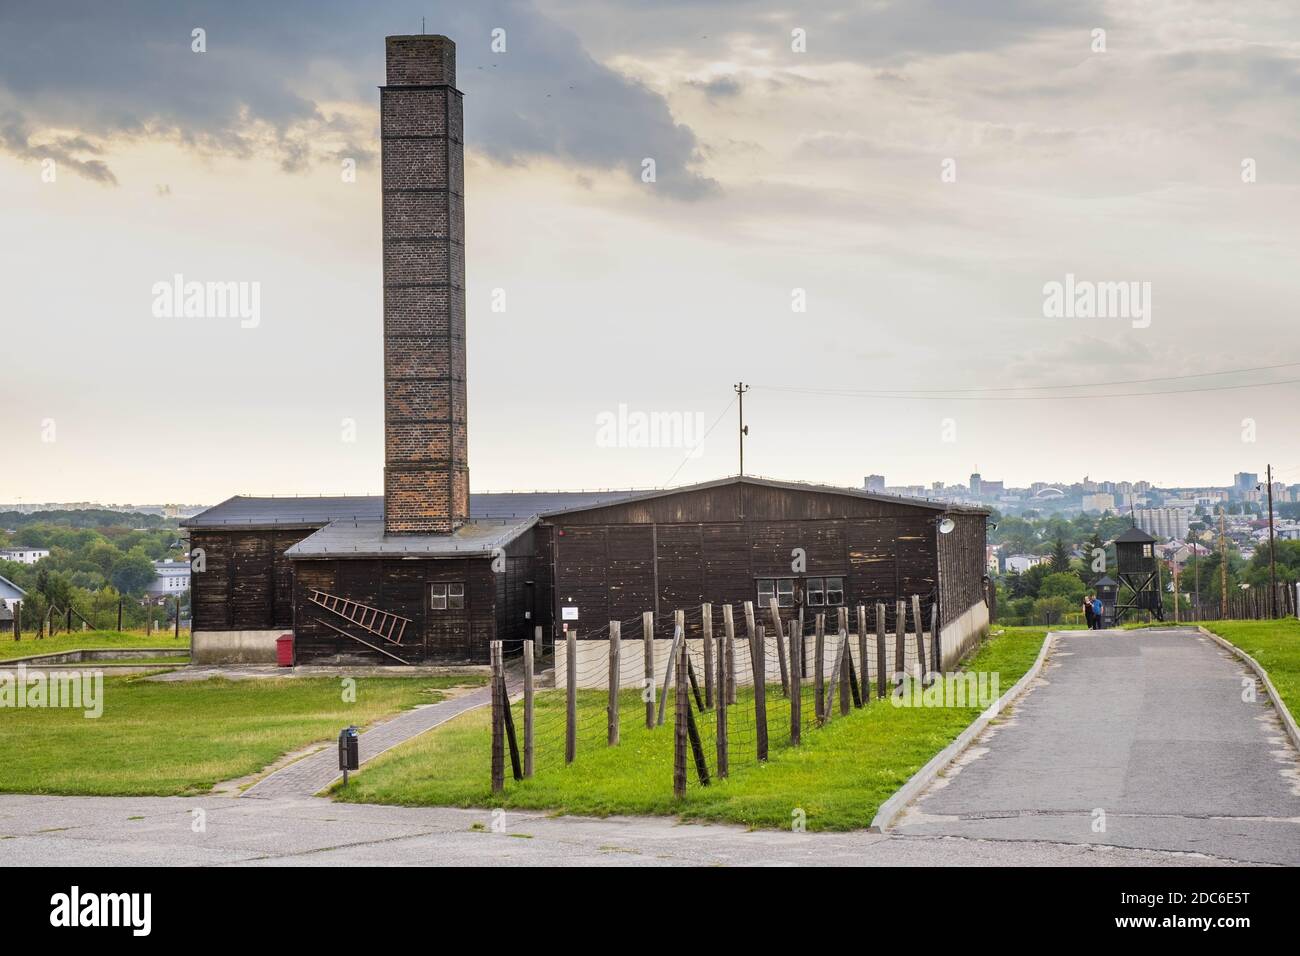 Lublin, Lubelskie / Poland - 2019/08/17: Reconstructed crematorium of Majdanek KL Lublin Nazis concentration and extermination camp - Konzentrationsla Stock Photo